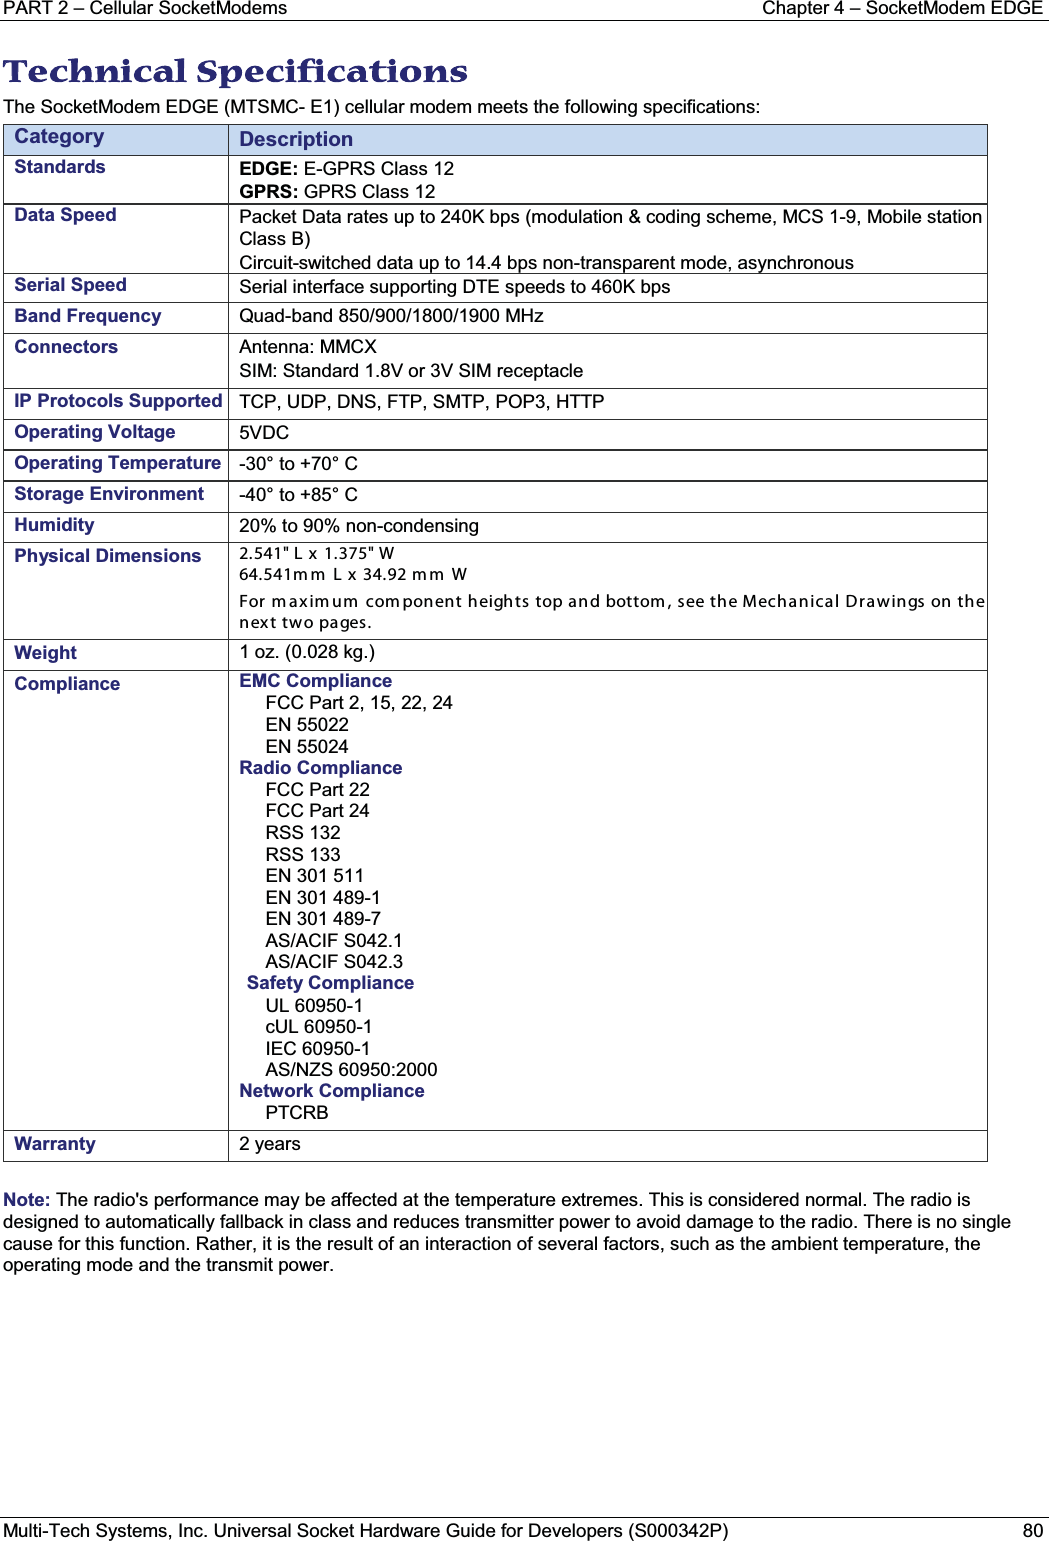 PART 2 – Cellular SocketModems Chapter 4 – SocketModem EDGEMulti-Tech Systems, Inc. Universal Socket Hardware Guide for Developers (S000342P) 80TTechnical Specifications The SocketModem EDGE (MTSMC- E1) cellular modem meets the following specifications: Category DescriptionStandards EDGE: E-GPRS Class 12GPRS: GPRS Class 12Data Speed Packet Data rates up to 240K bps (modulation &amp; coding scheme, MCS 1-9, Mobile station Class B)Circuit-switched data up to 14.4 bps non-transparent mode, asynchronousSerial Speed Serial interface supporting DTE speeds to 460K bpsBand Frequency Quad-band 850/900/1800/1900 MHzConnectors Antenna: MMCXSIM: Standard 1.8V or 3V SIM receptacleIP Protocols Supported TCP, UDP, DNS, FTP, SMTP, POP3, HTTPOperating Voltage 5VDCOperating Temperature -30° to +70° C  Storage Environment -40° to +85° C Humidity 20% to 90% non-condensing Physical Dimensions 2.541&quot; L x 1.375&quot; W  64.541m m  L x 34.92 mm  W  For maximum component heights top and bottom, see the Mechanical Drawings on the next two pages.Weight 1 oz. (0.028 kg.) Compliance EMC ComplianceFCC Part 2, 15, 22, 24EN 55022EN 55024Radio ComplianceFCC Part 22FCC Part 24RSS 132RSS 133EN 301 511EN 301 489-1EN 301 489-7AS/ACIF S042.1AS/ACIF S042.3Safety ComplianceUL 60950-1cUL 60950-1IEC 60950-1AS/NZS 60950:2000Network CompliancePTCRBWarranty 2 yearsNote: The radio&apos;s performance may be affected at the temperature extremes. This is considered normal. The radio is designed to automatically fallback in class and reduces transmitter power to avoid damage to the radio. There is no single cause for this function. Rather, it is the result of an interaction of several factors, such as the ambient temperature, the operating mode and the transmit power.